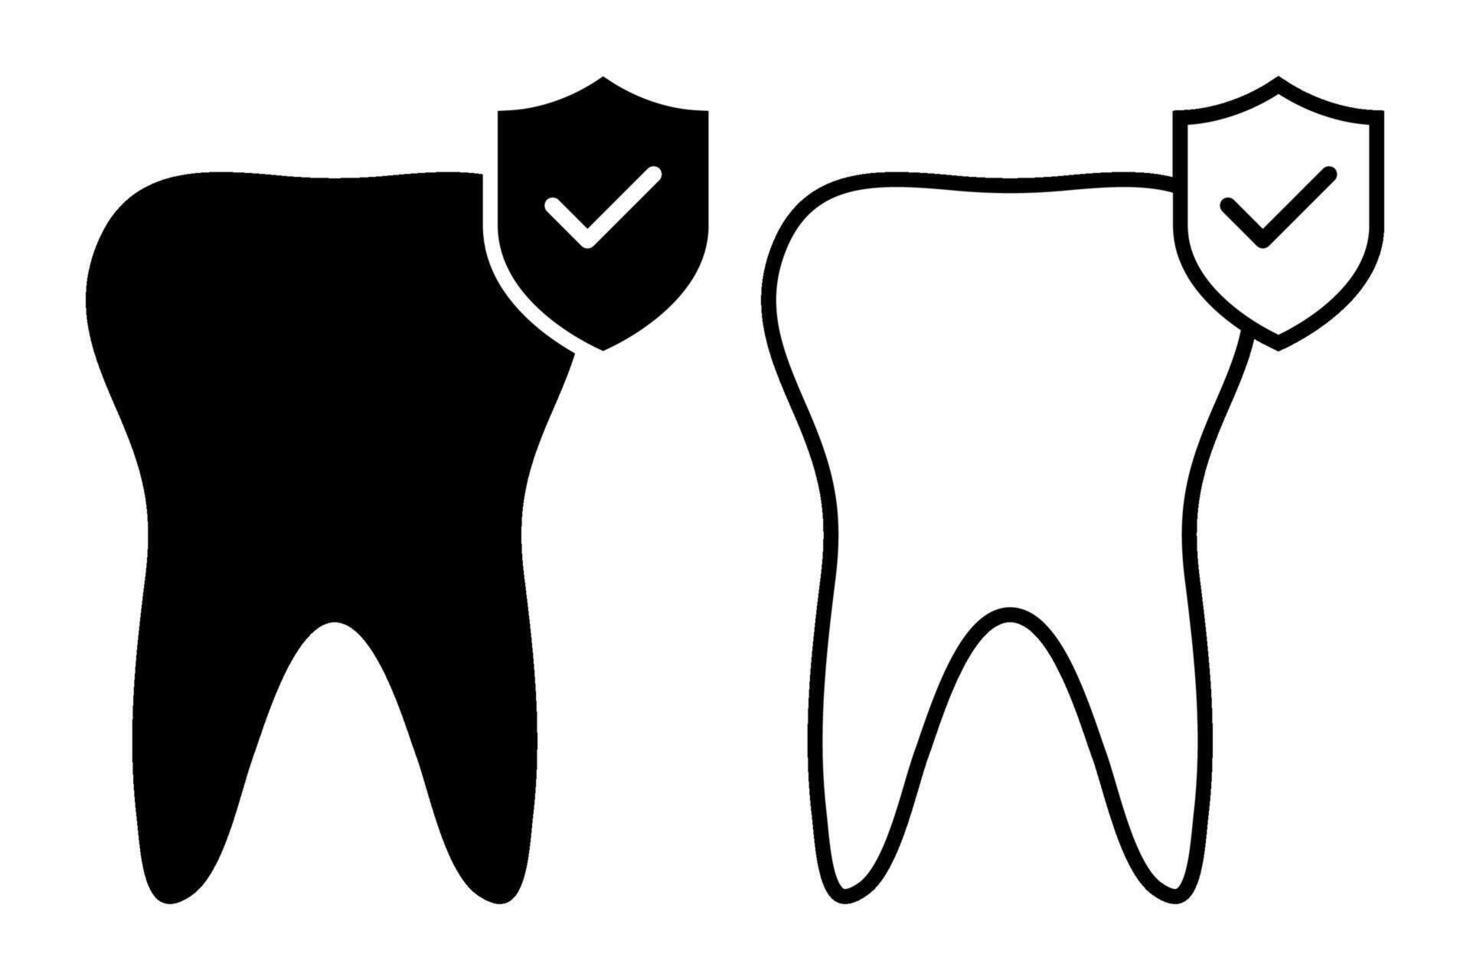 Tooth icon. Dental concept. Basic simple design vector